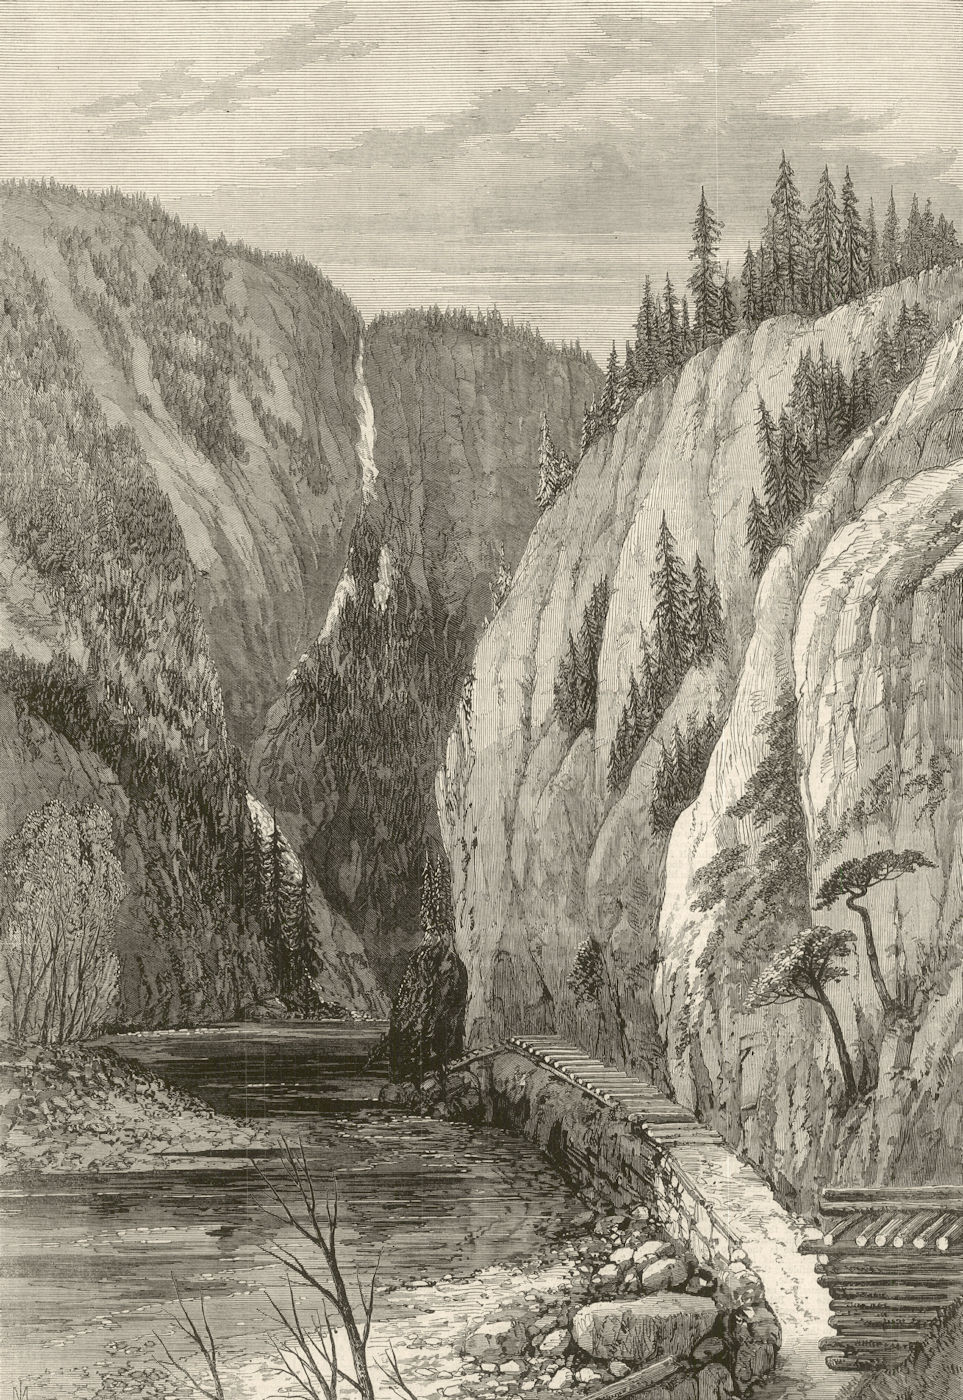 British Columbia: Upper entrance, defile at Bute Inlet head. Canada 1868